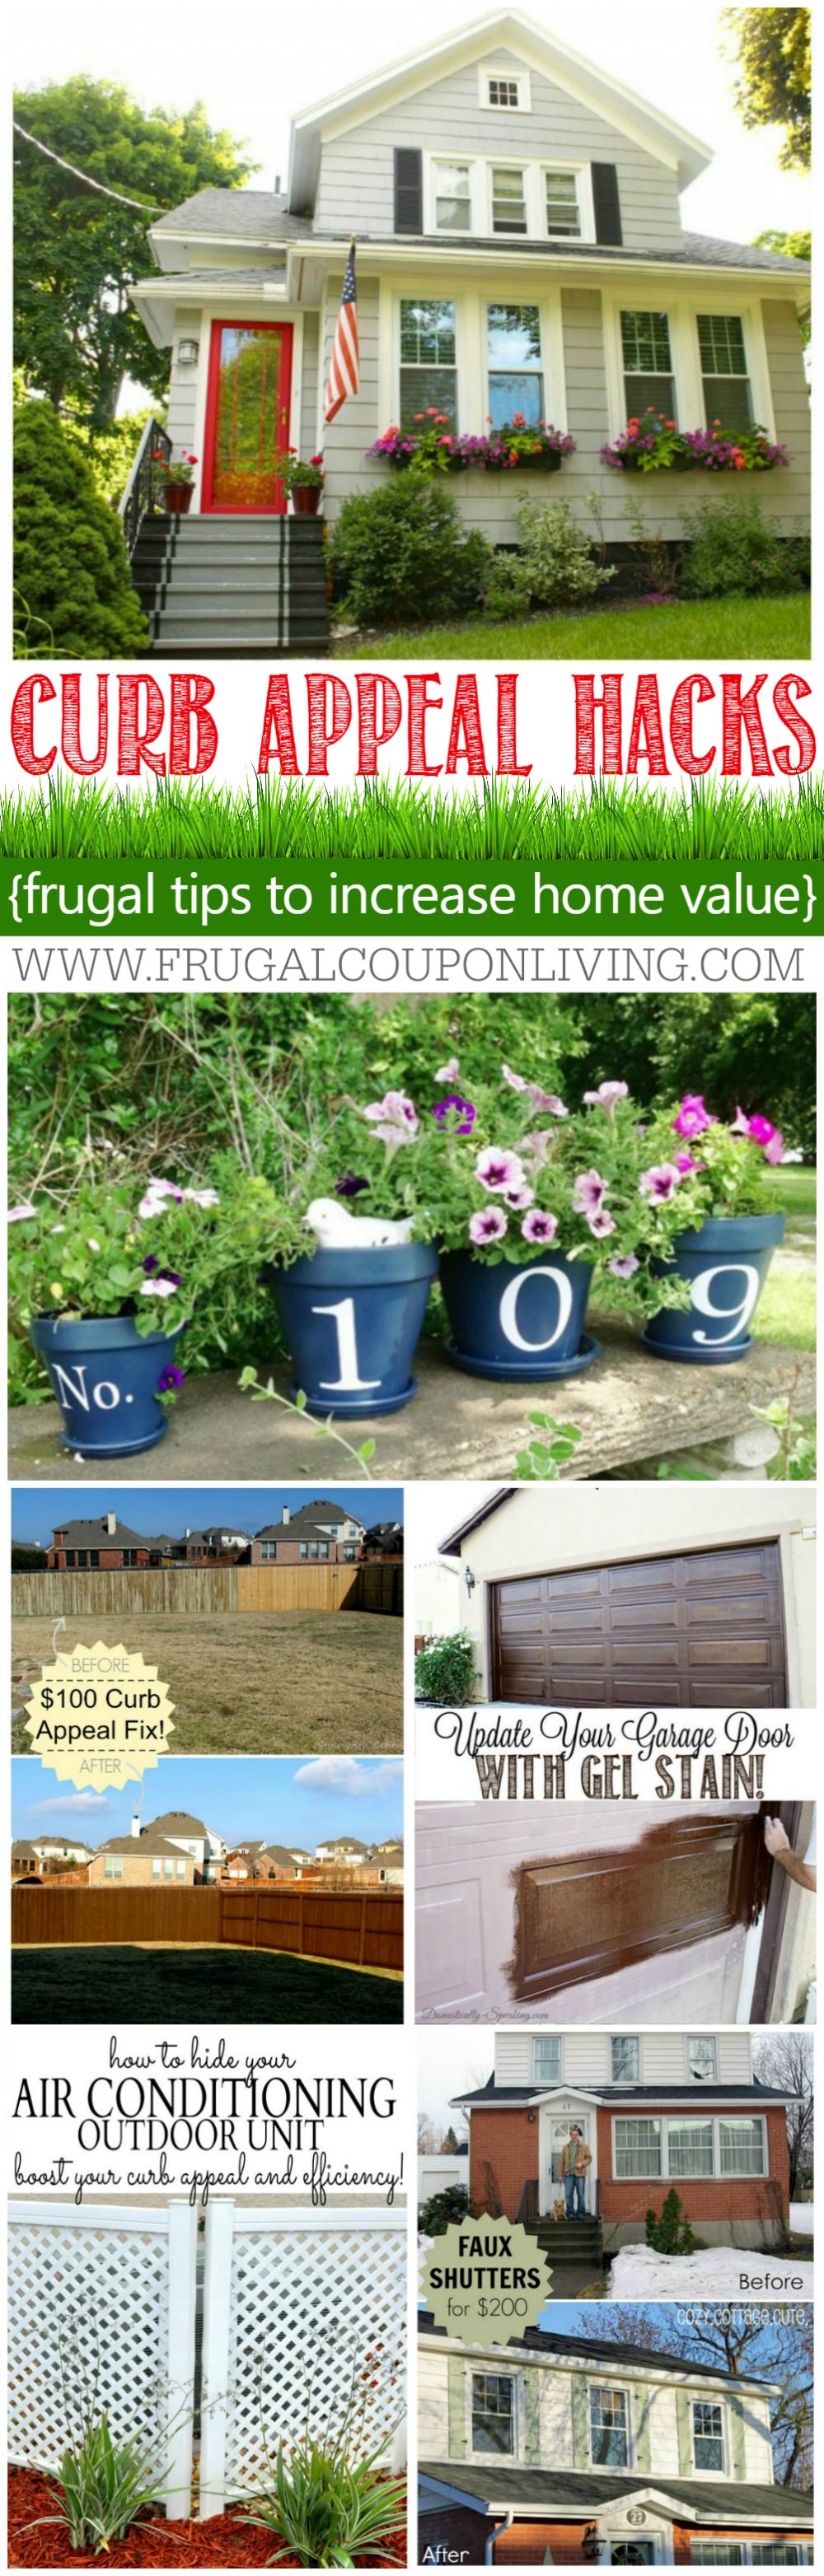 Do you want to update the appearance of your home for the little expense to increase your home value? Check out these Frugal Home Ideas!